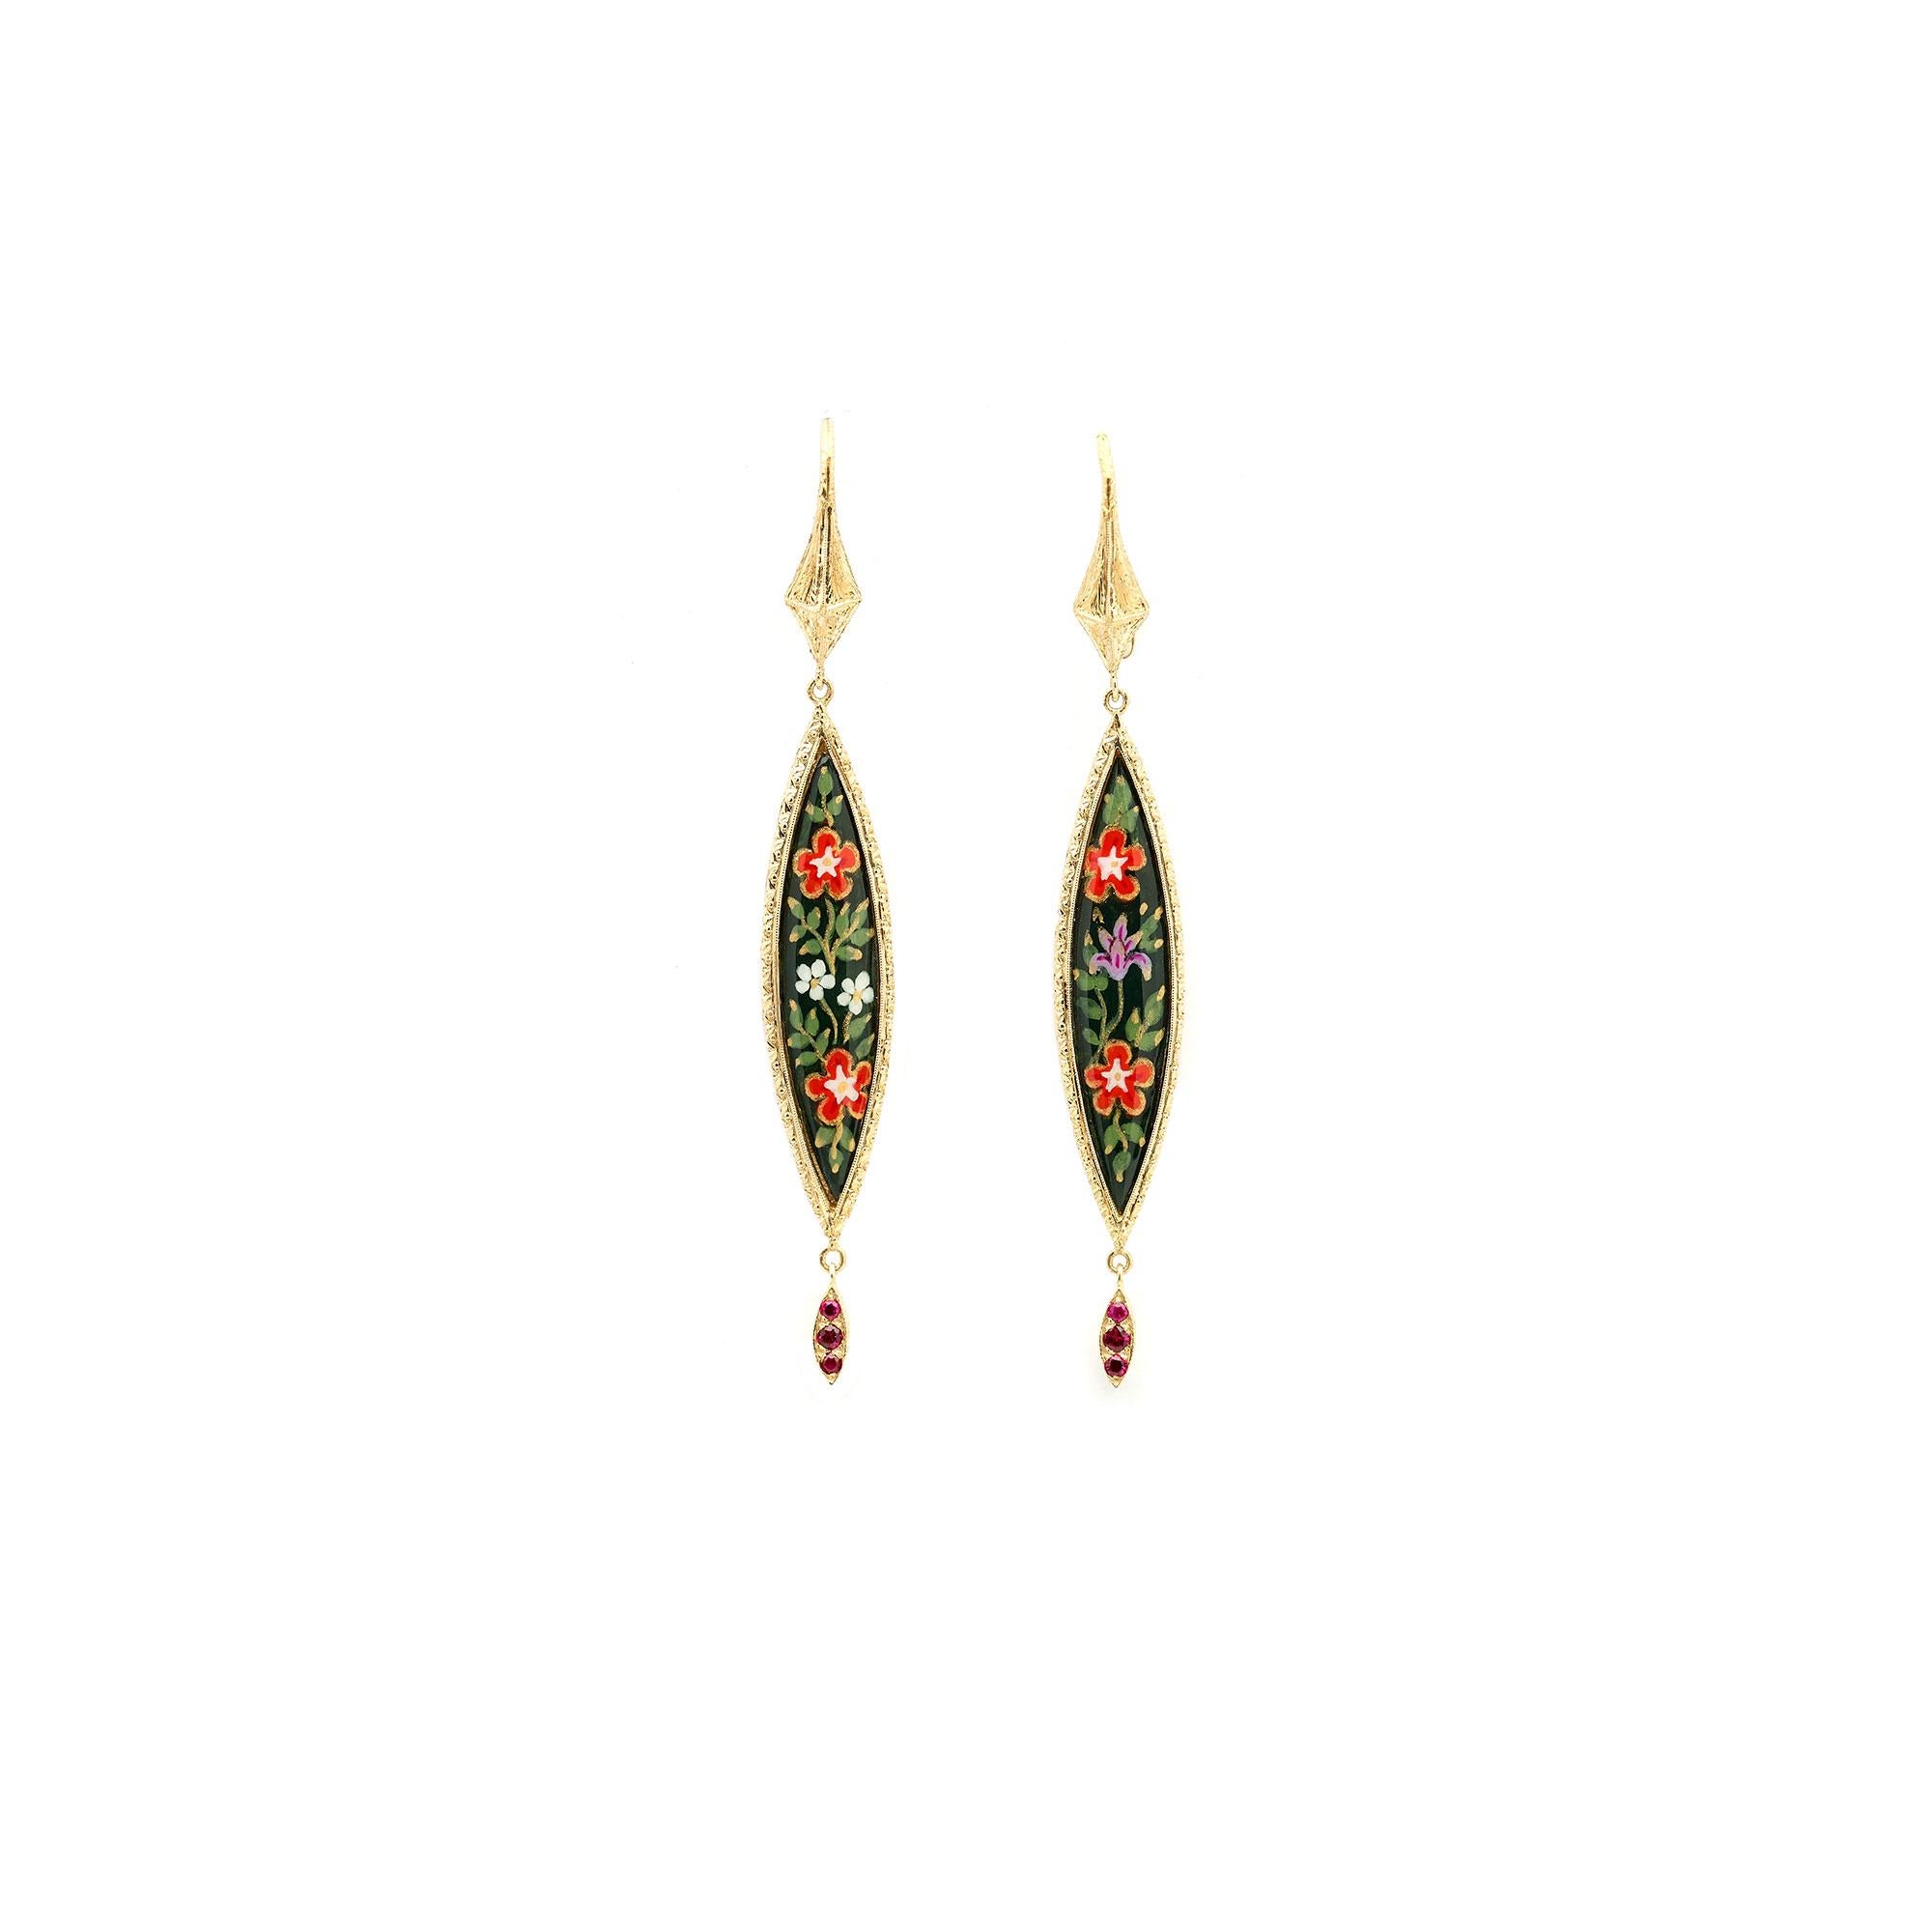 18kt gold earrings, Diamonds, engraved painted in miniature & enamelled by hands For Sale 1